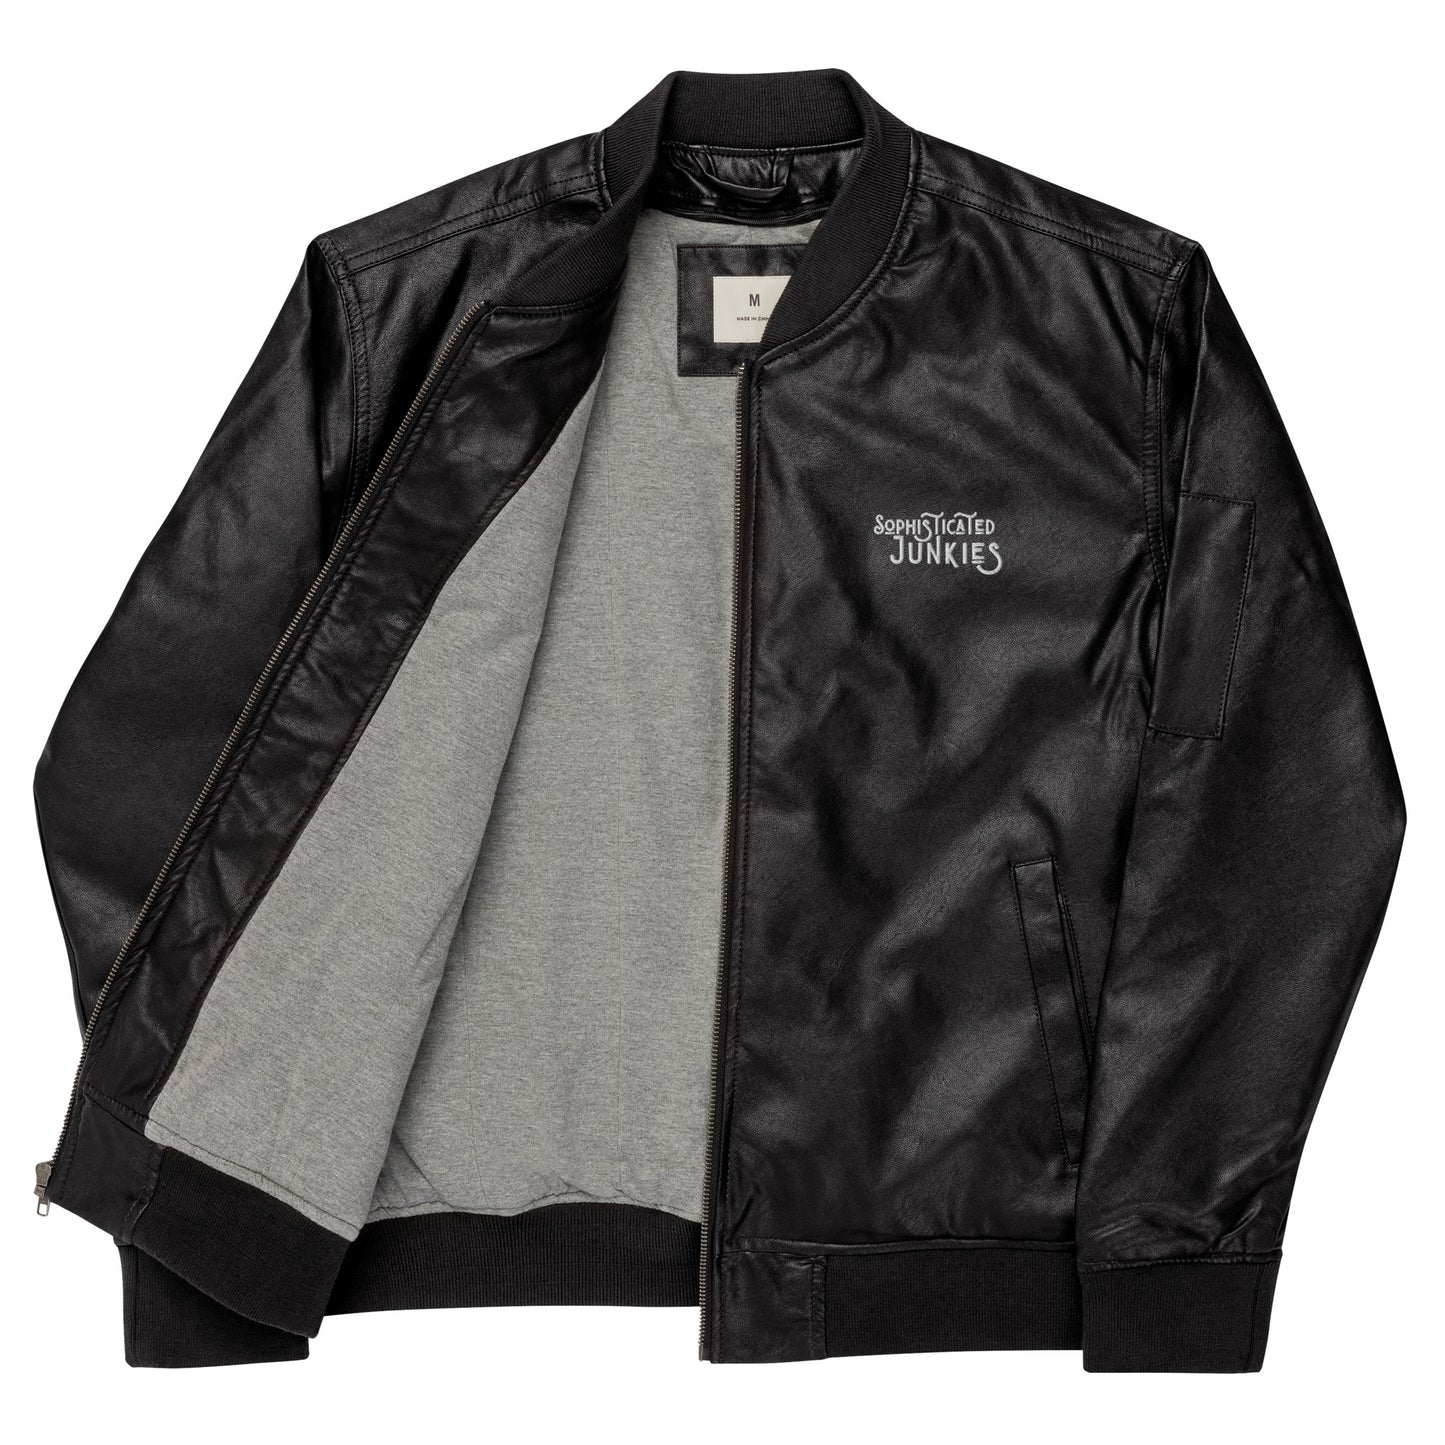 Sophisticated Junkies Leather Bomber Jacket